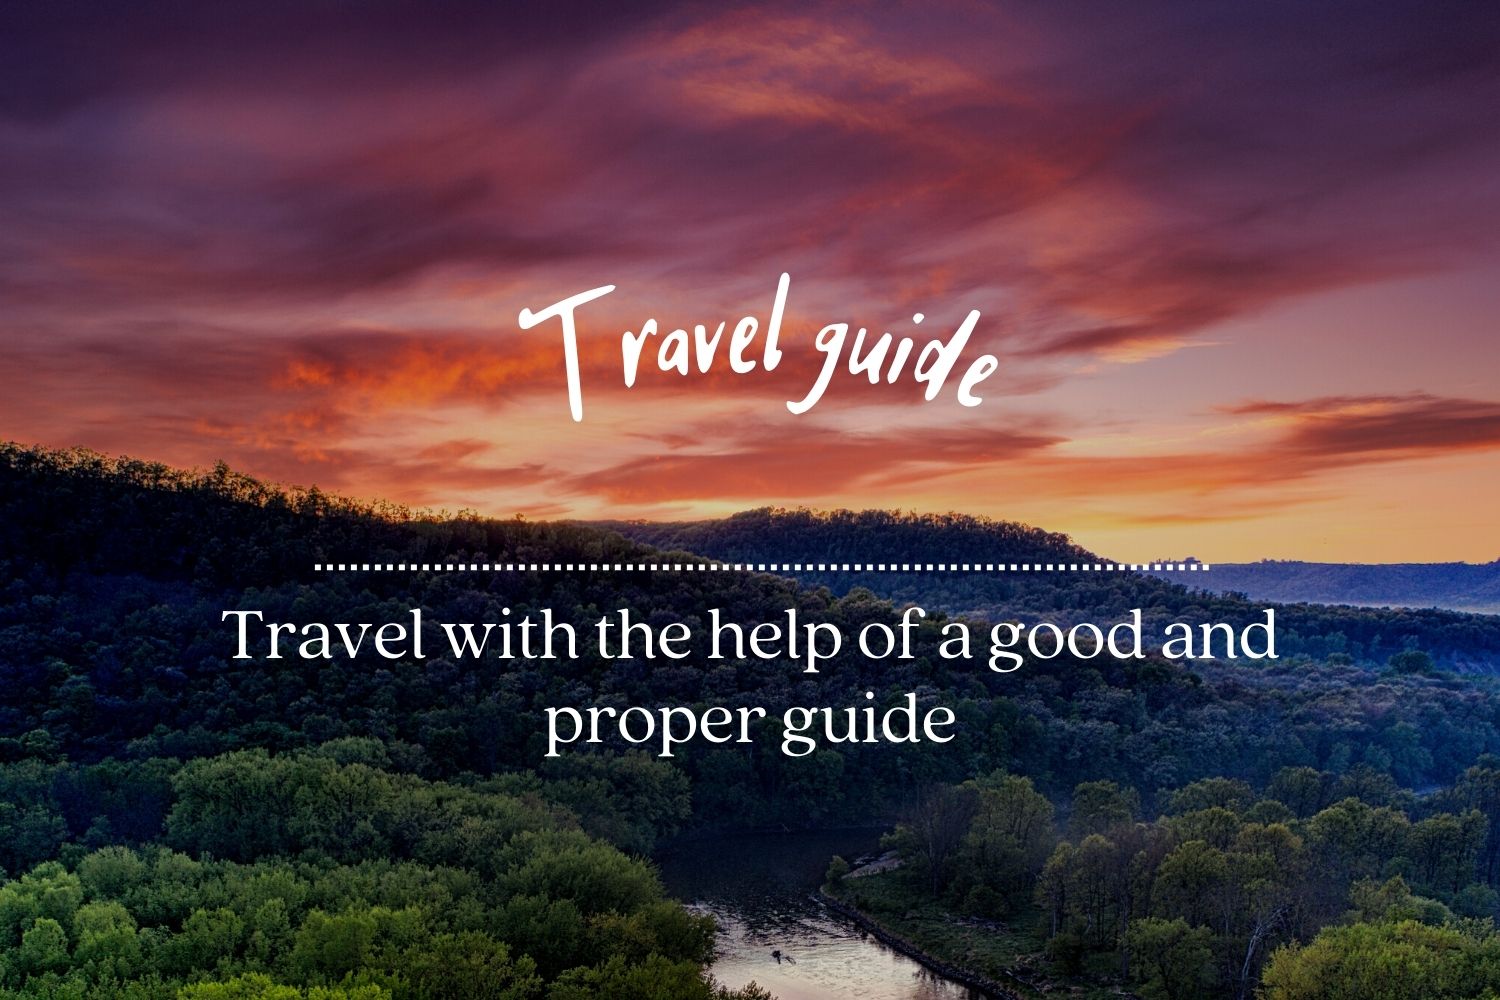 Travel with the help of a good and proper guide